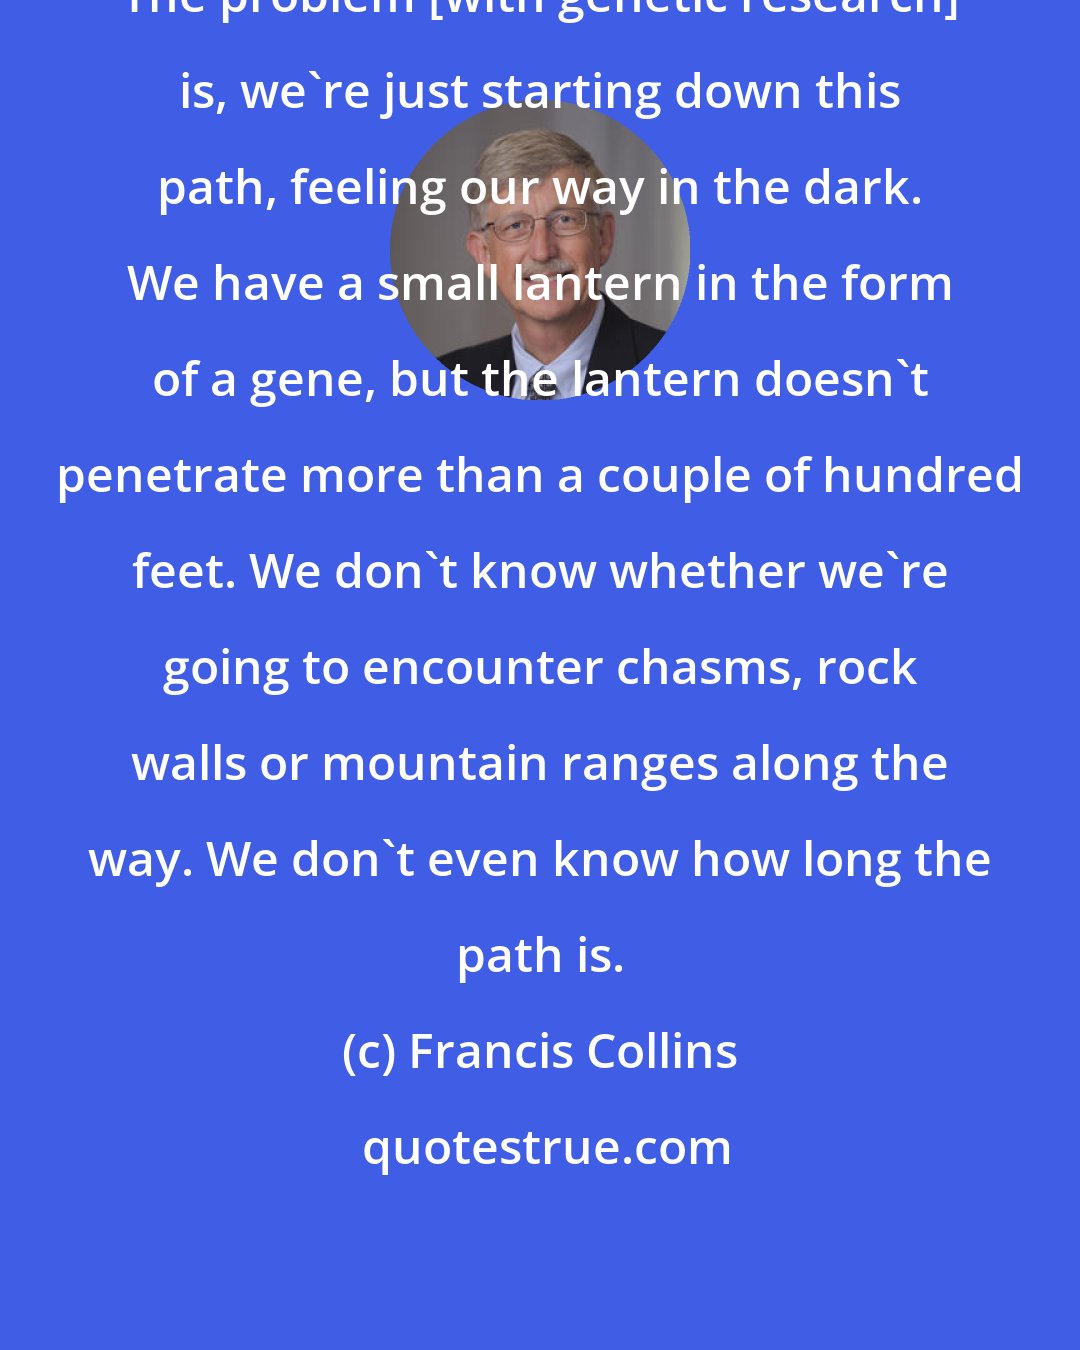 Francis Collins: The problem [with genetic research] is, we're just starting down this path, feeling our way in the dark. We have a small lantern in the form of a gene, but the lantern doesn't penetrate more than a couple of hundred feet. We don't know whether we're going to encounter chasms, rock walls or mountain ranges along the way. We don't even know how long the path is.